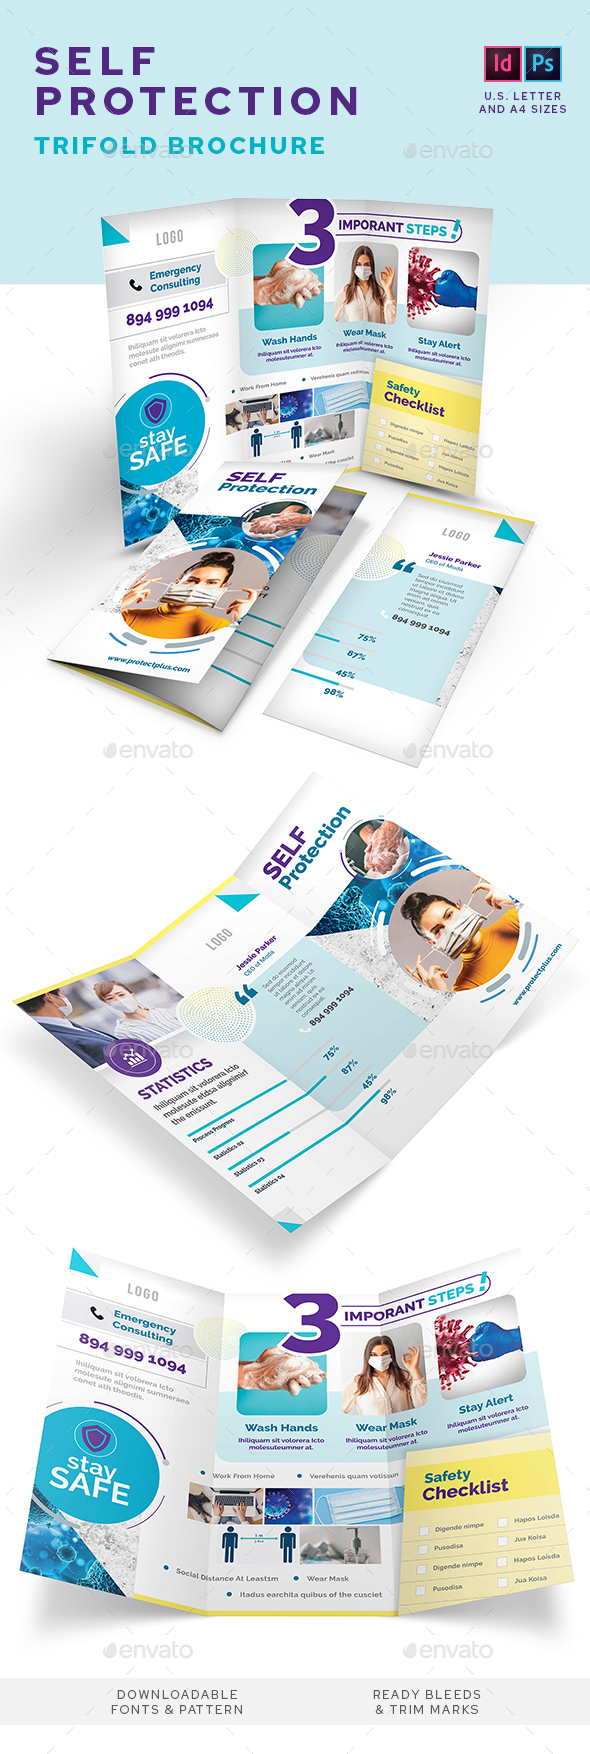 [DOWNLOAD]Self Protection Trifold Brochure